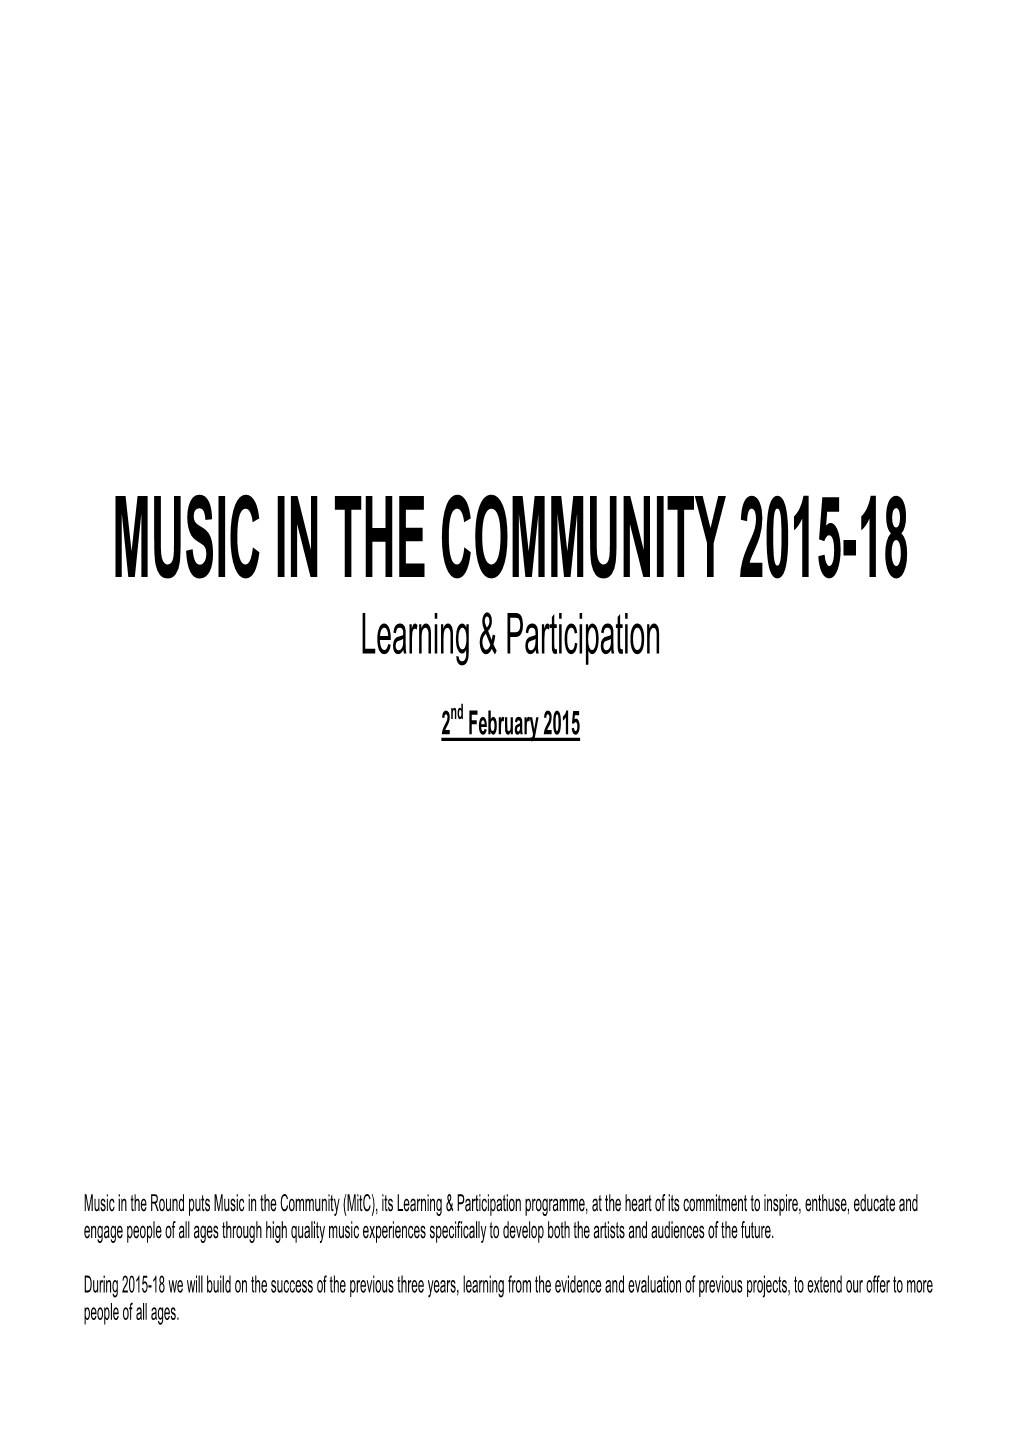 MUSIC in the COMMUNITY 2015-18 Learning & Participation